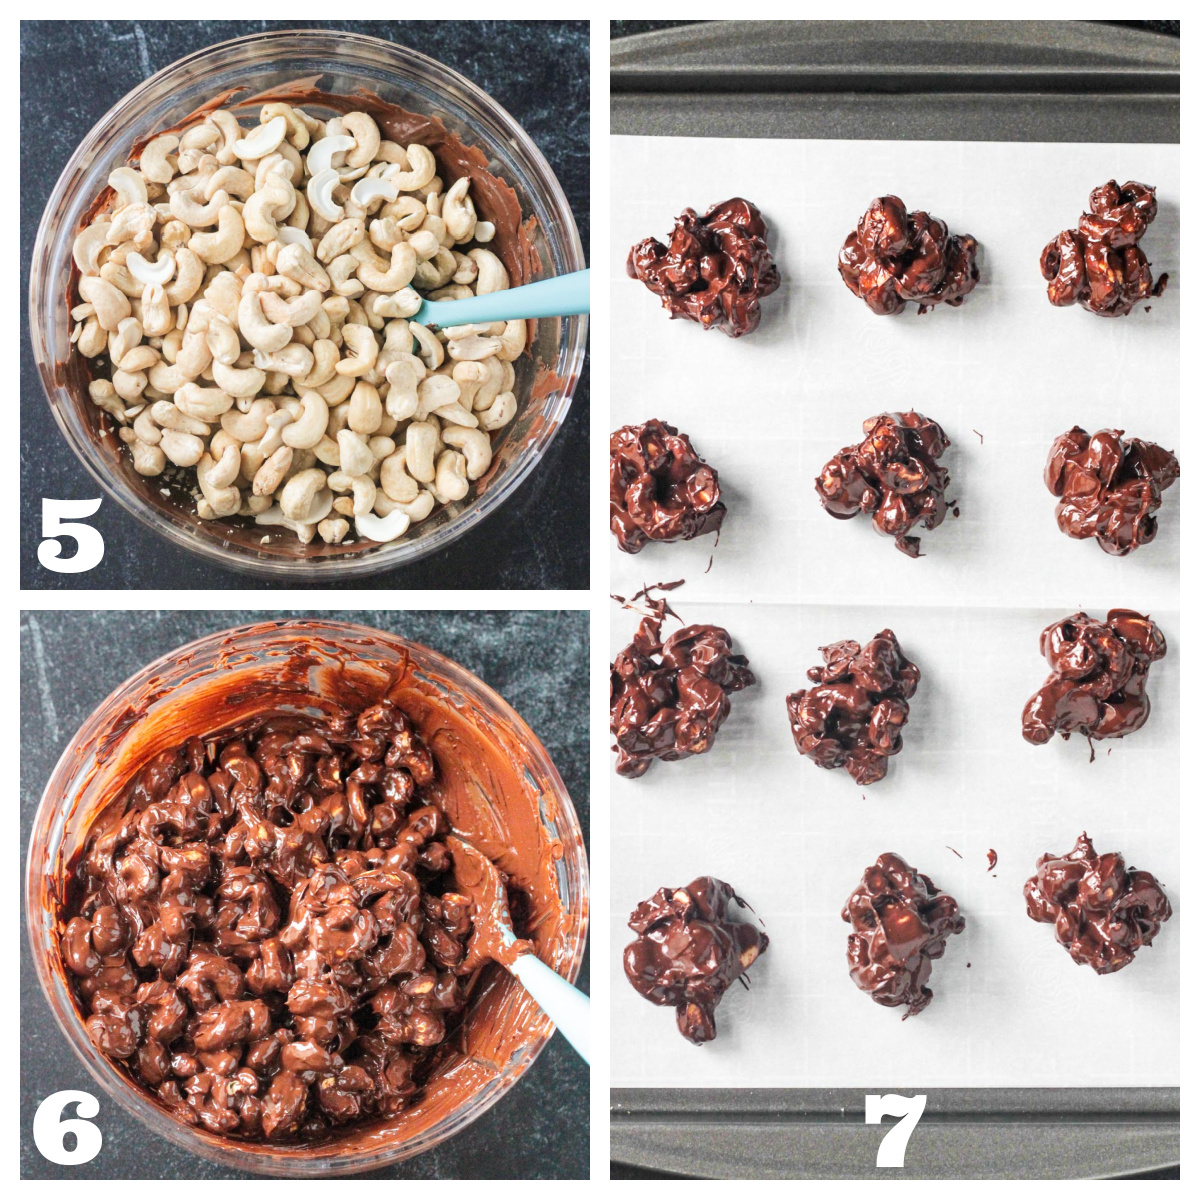 3 photo collage of covering the cashews in melted chocolate and scooping them into small piles on a baking sheet.